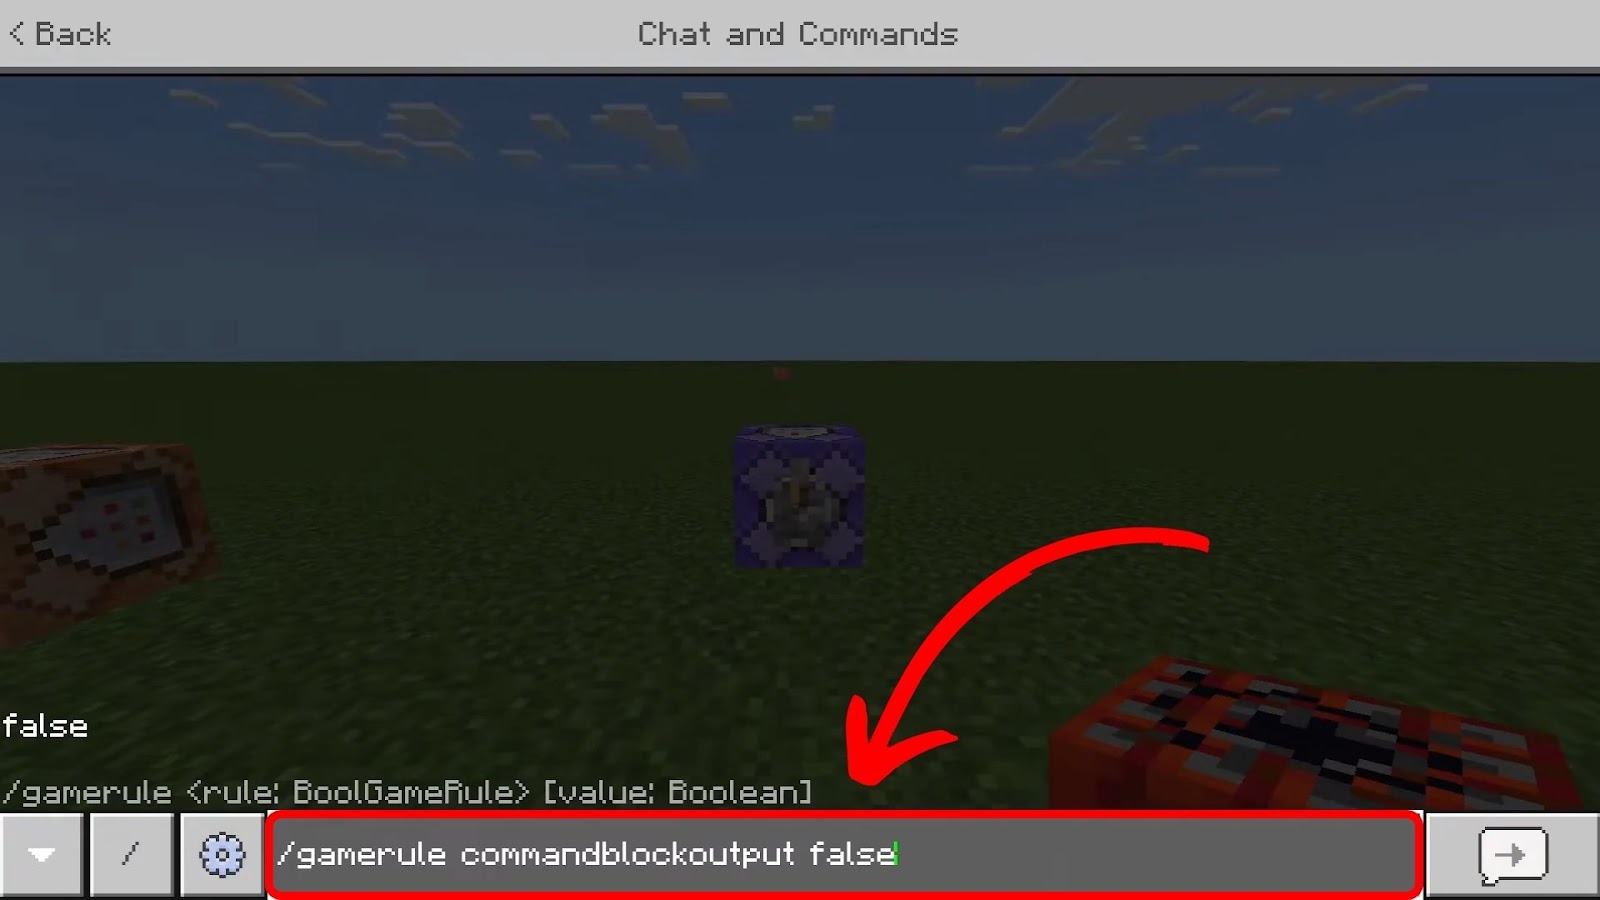 How to Enter Command Block Out in Minecraft